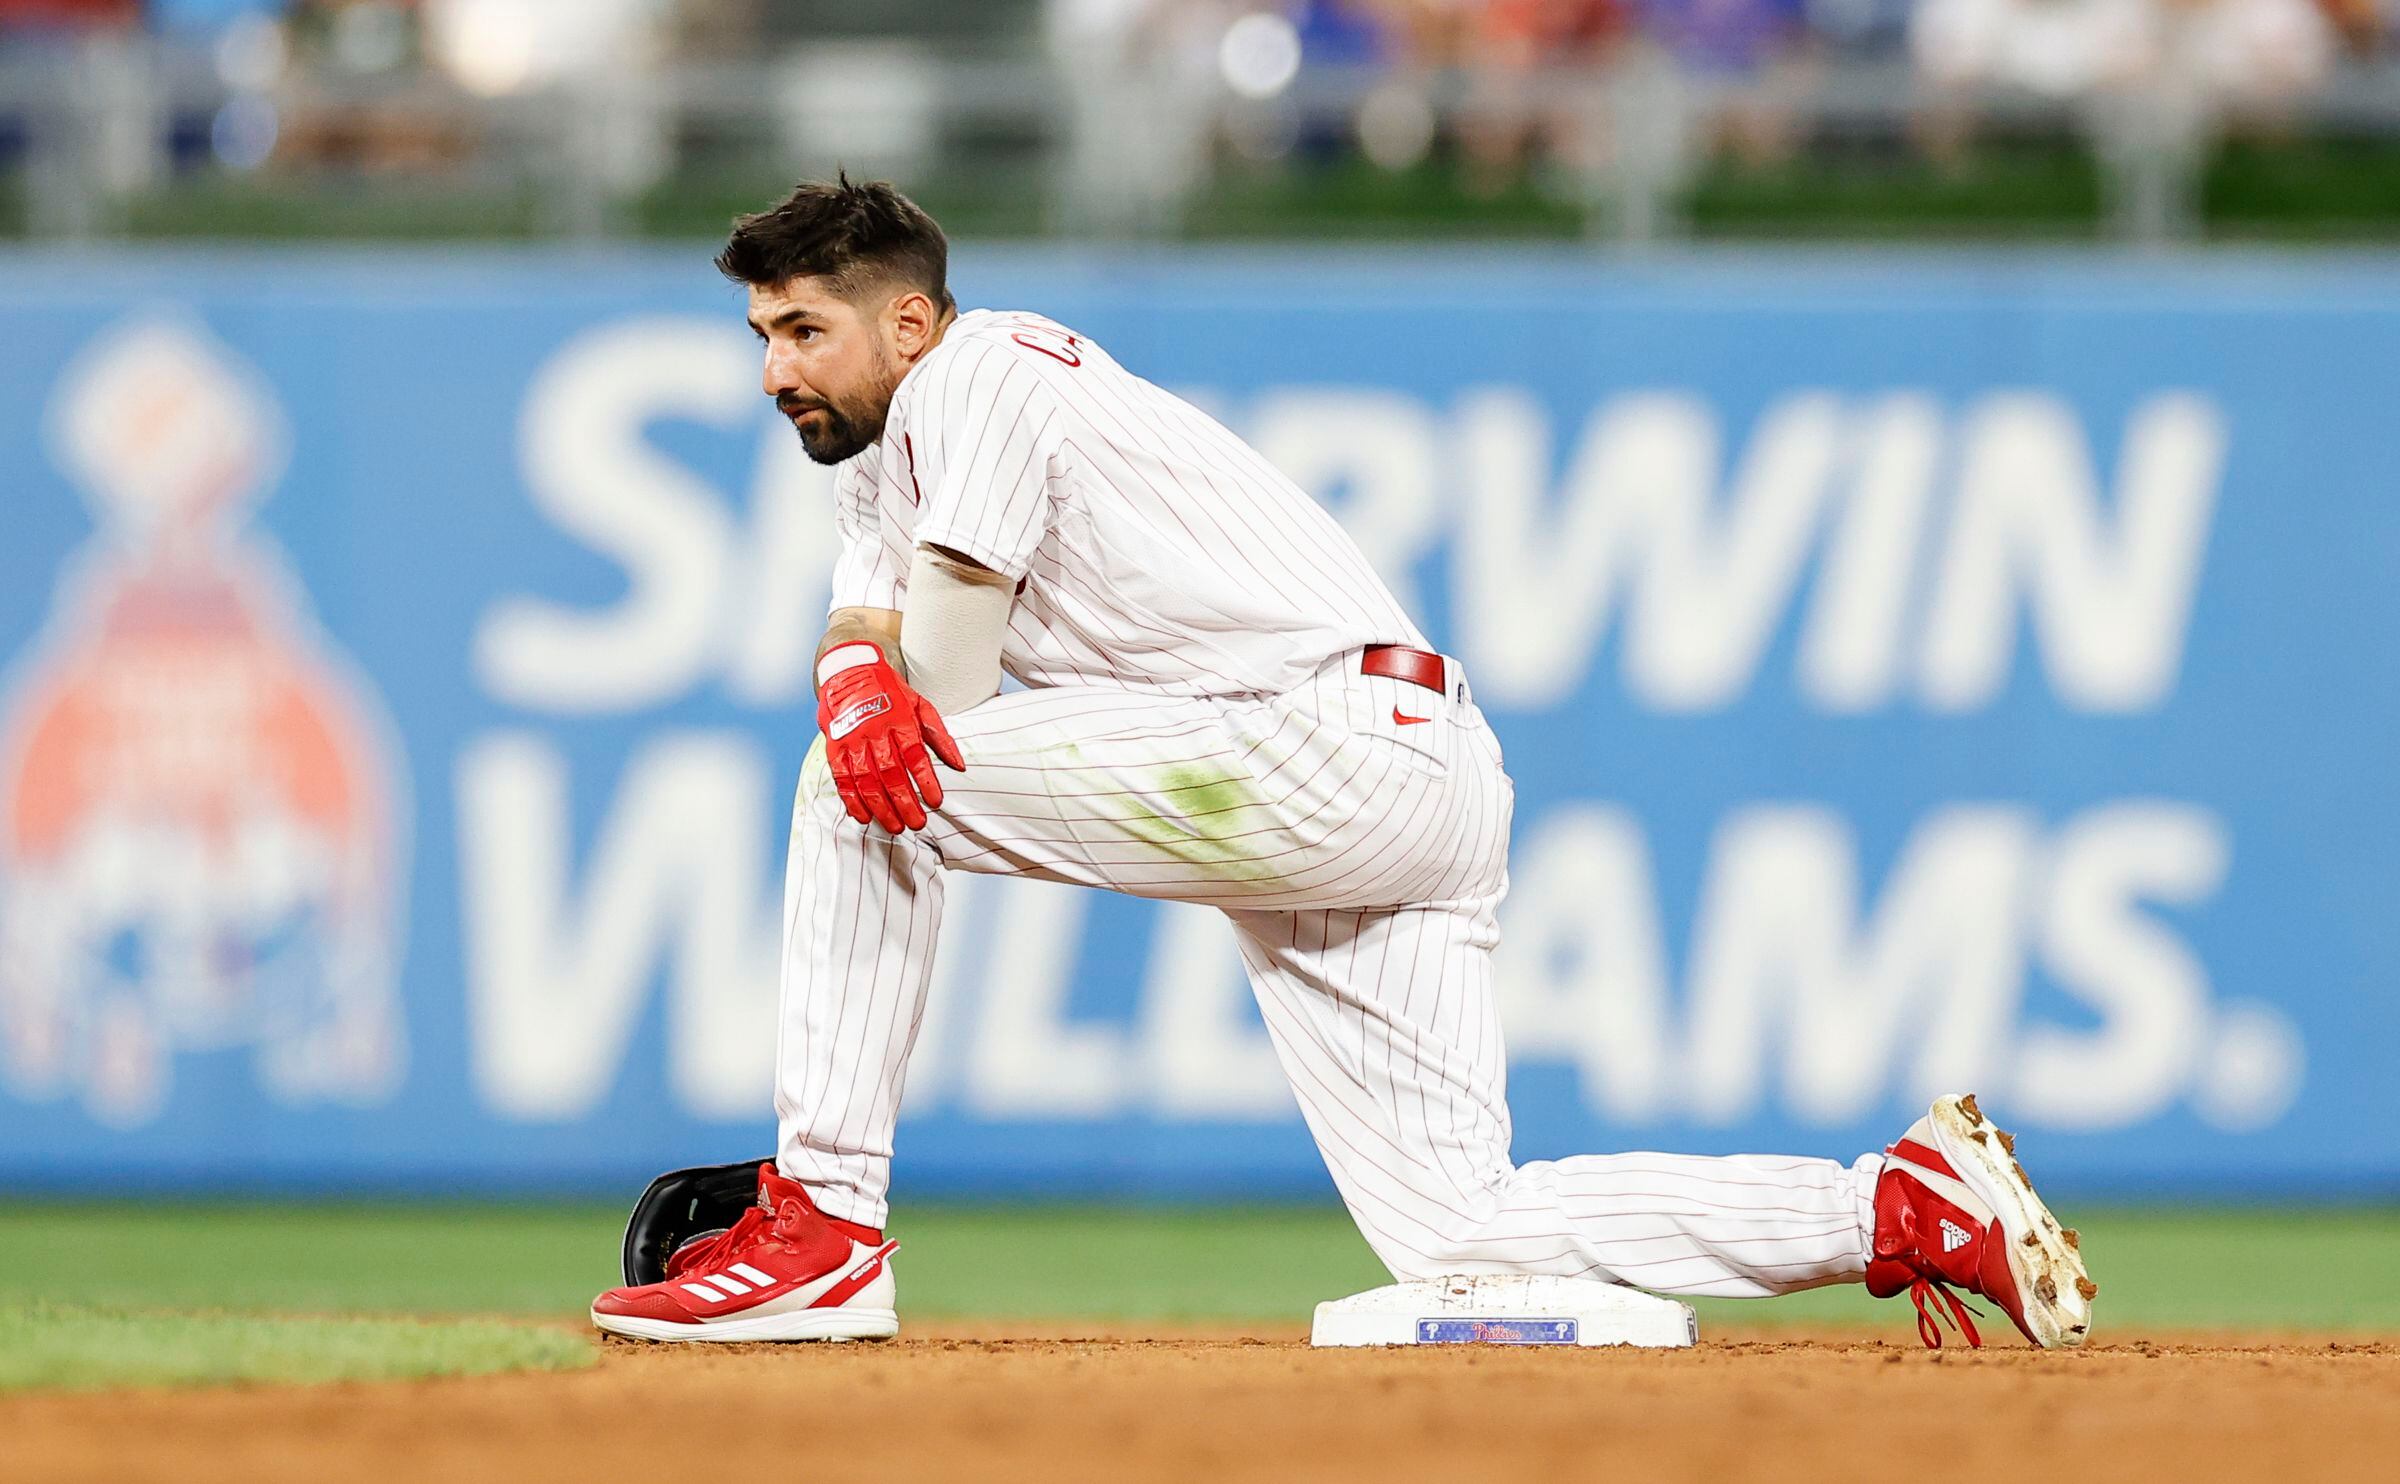 Phillies' Nick Castellanos headed for MRI after 'cramp' in his